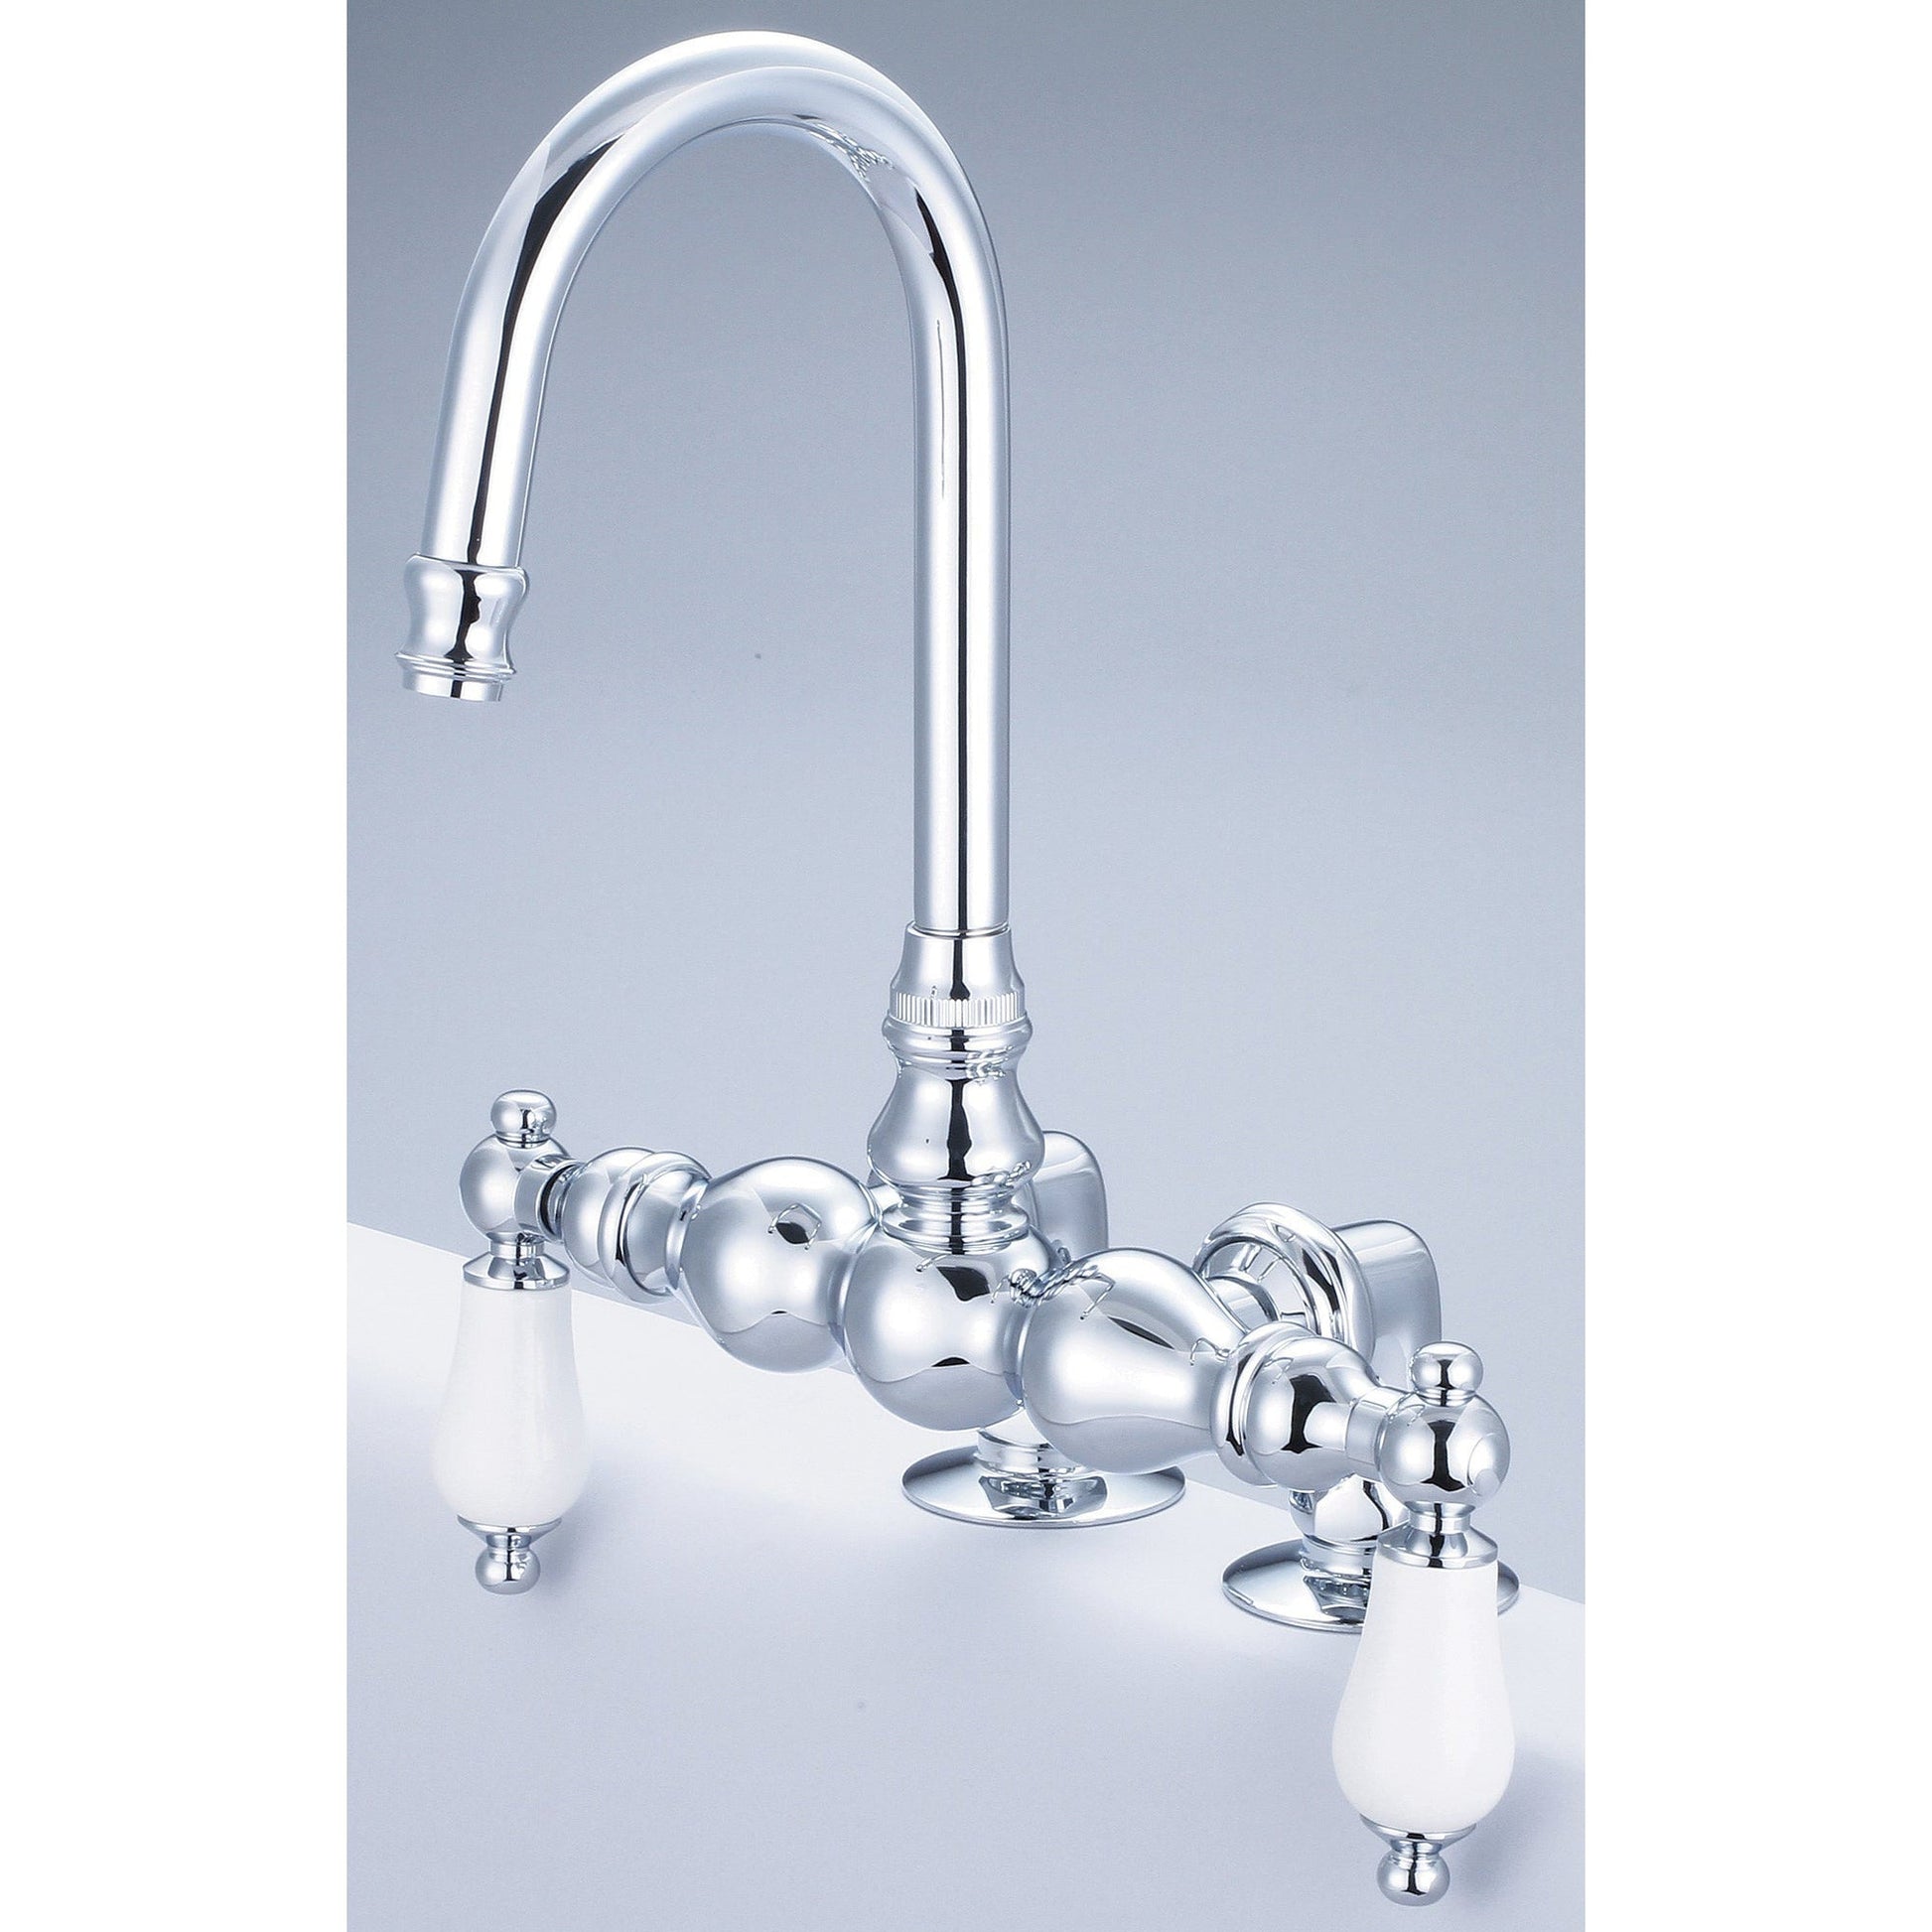 Water Creation Vintage Classic Center Deck Mount Tub F6-0016 9.25" Silver Solid Brass Faucet With Gooseneck Spout And 2-Inch Risers And Porcelain Lever Handles Without Labels